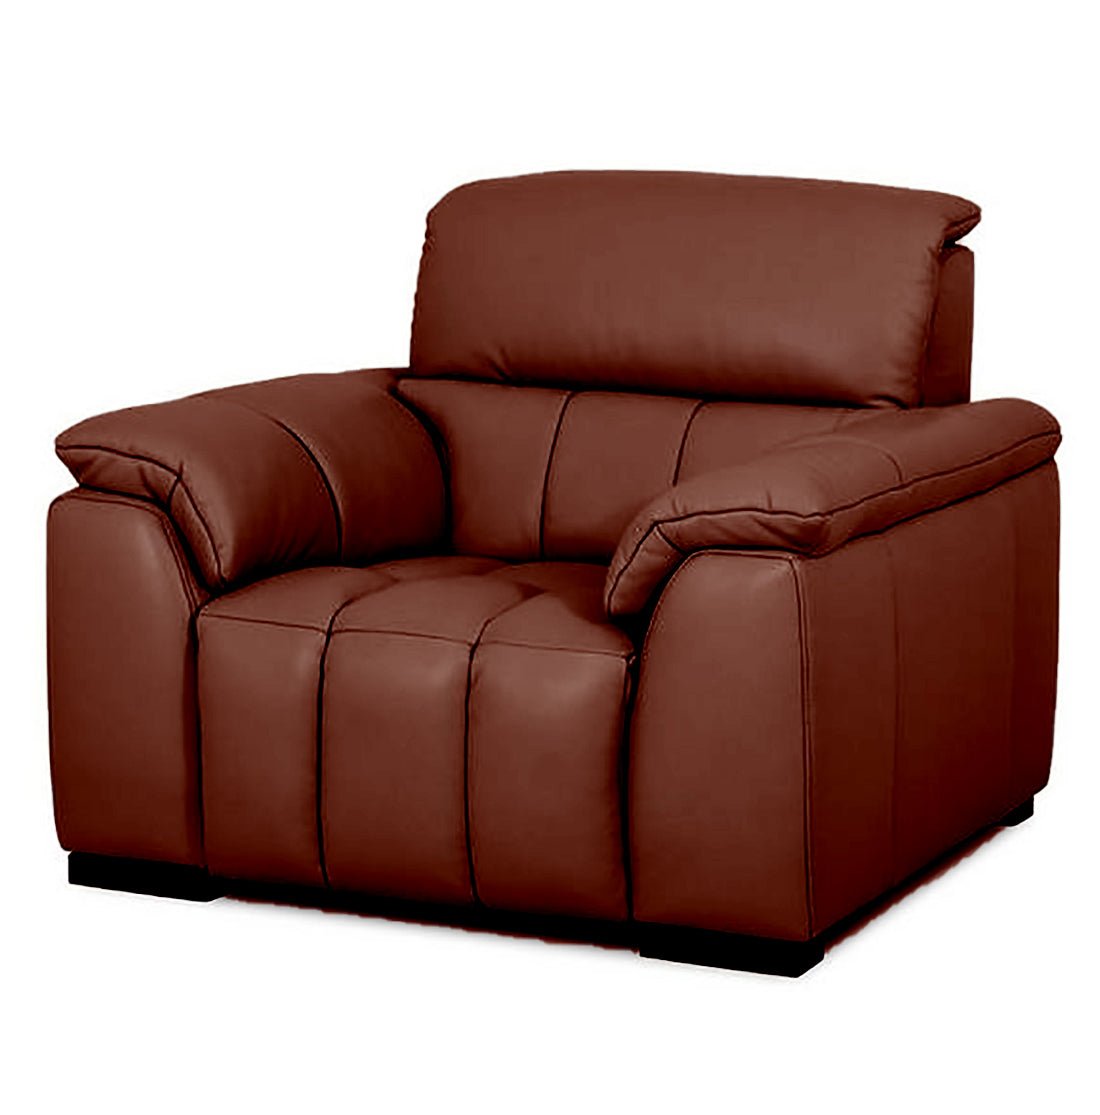 Casanoy 1 Seater Leather Sofa for Living Room | 1 Seater Leather Sofa - Torque India